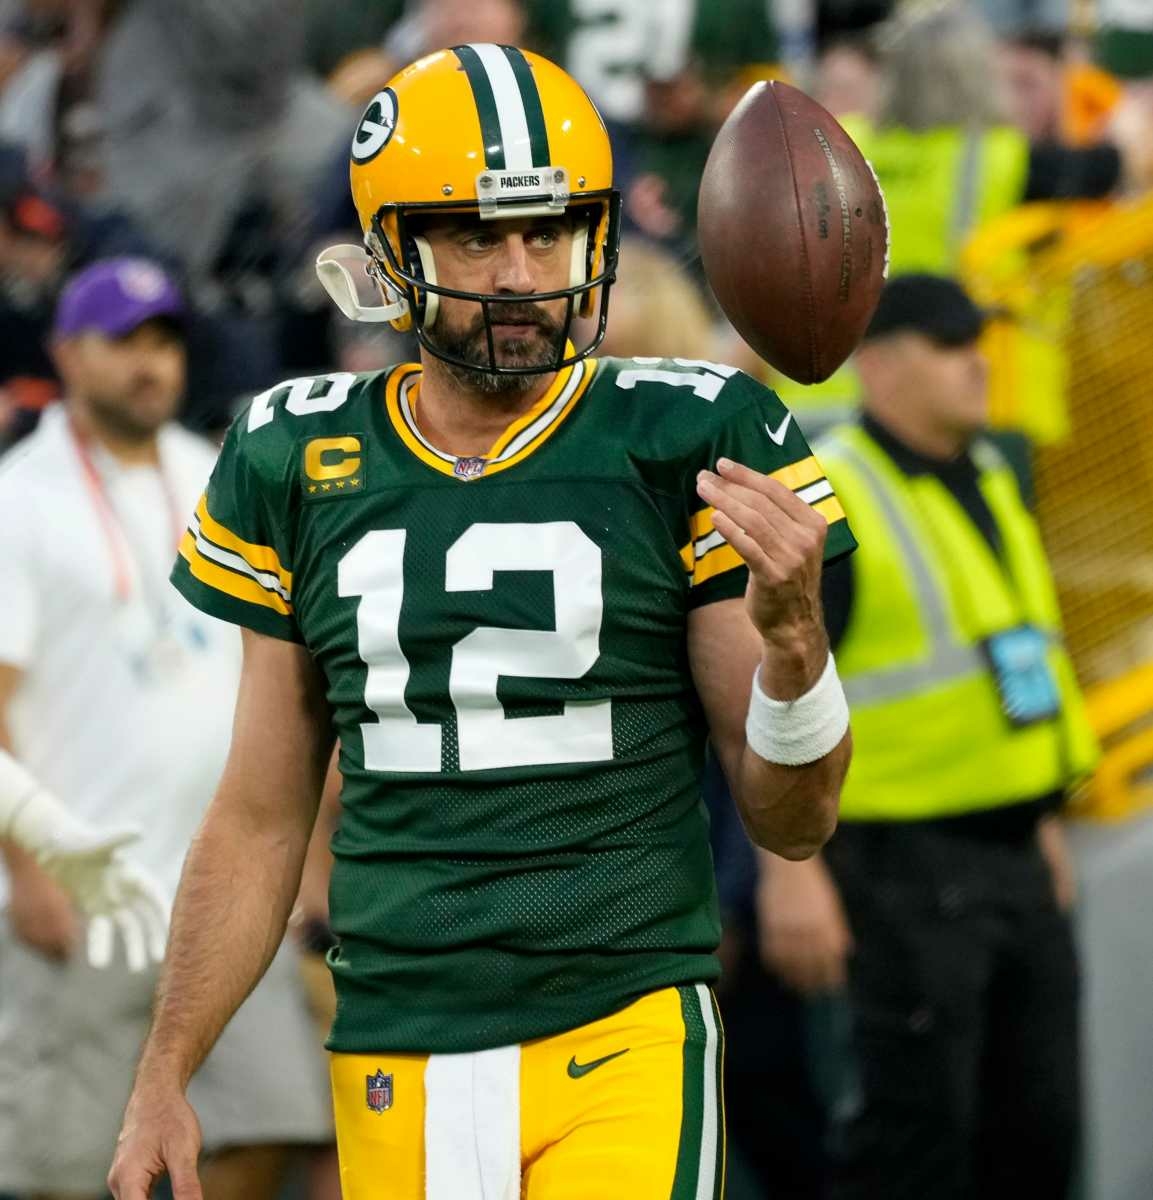 NFL Week 2 Live Analysis: Packers and Aaron Jones Back in Action Against Bears